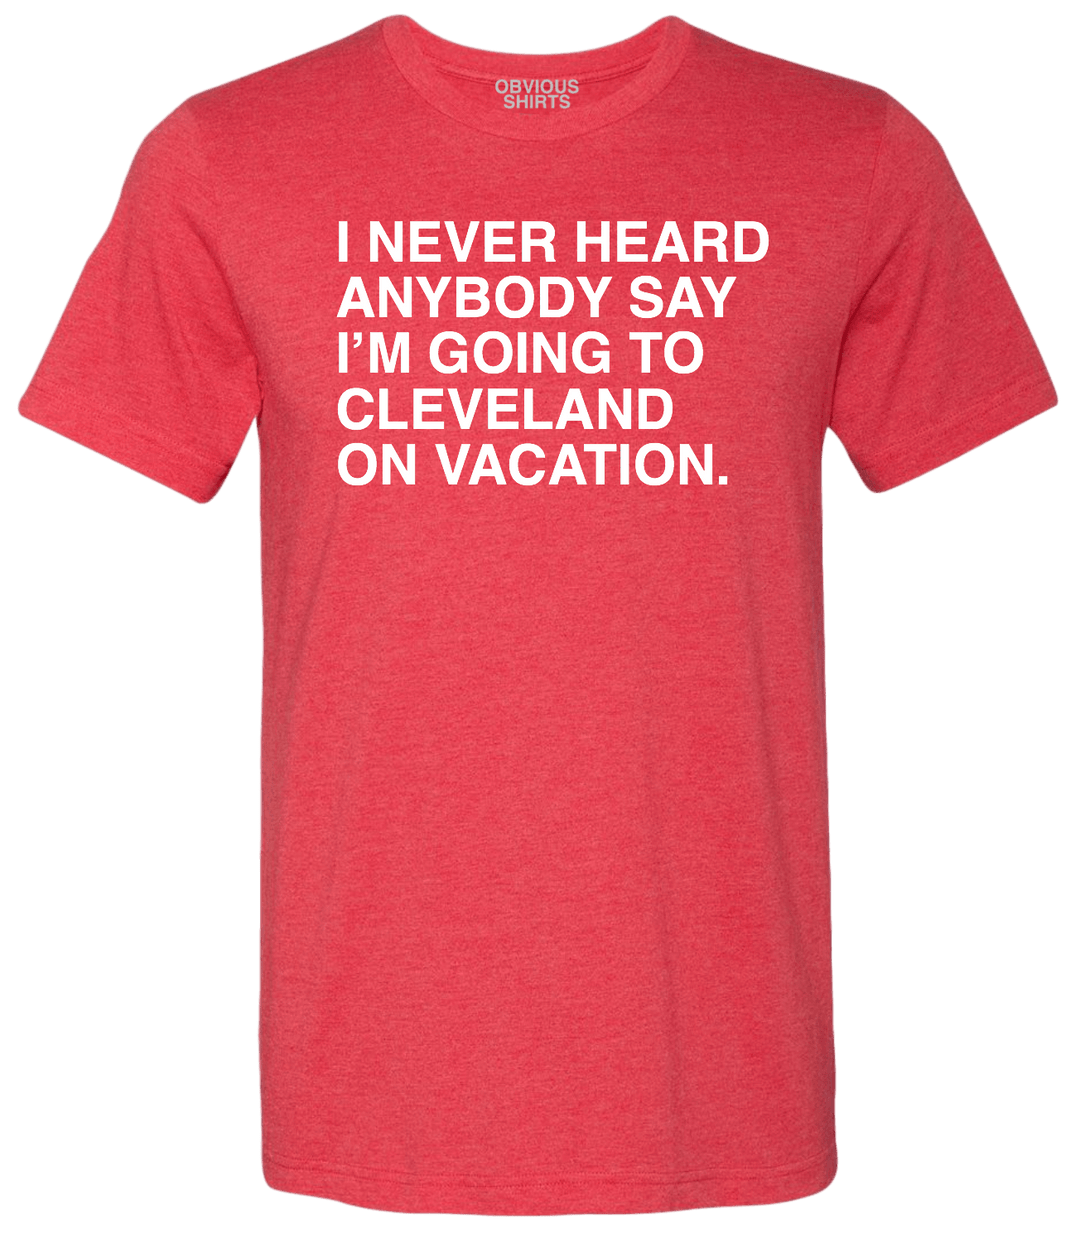 CLEVELAND VACATION - OBVIOUS SHIRTS.